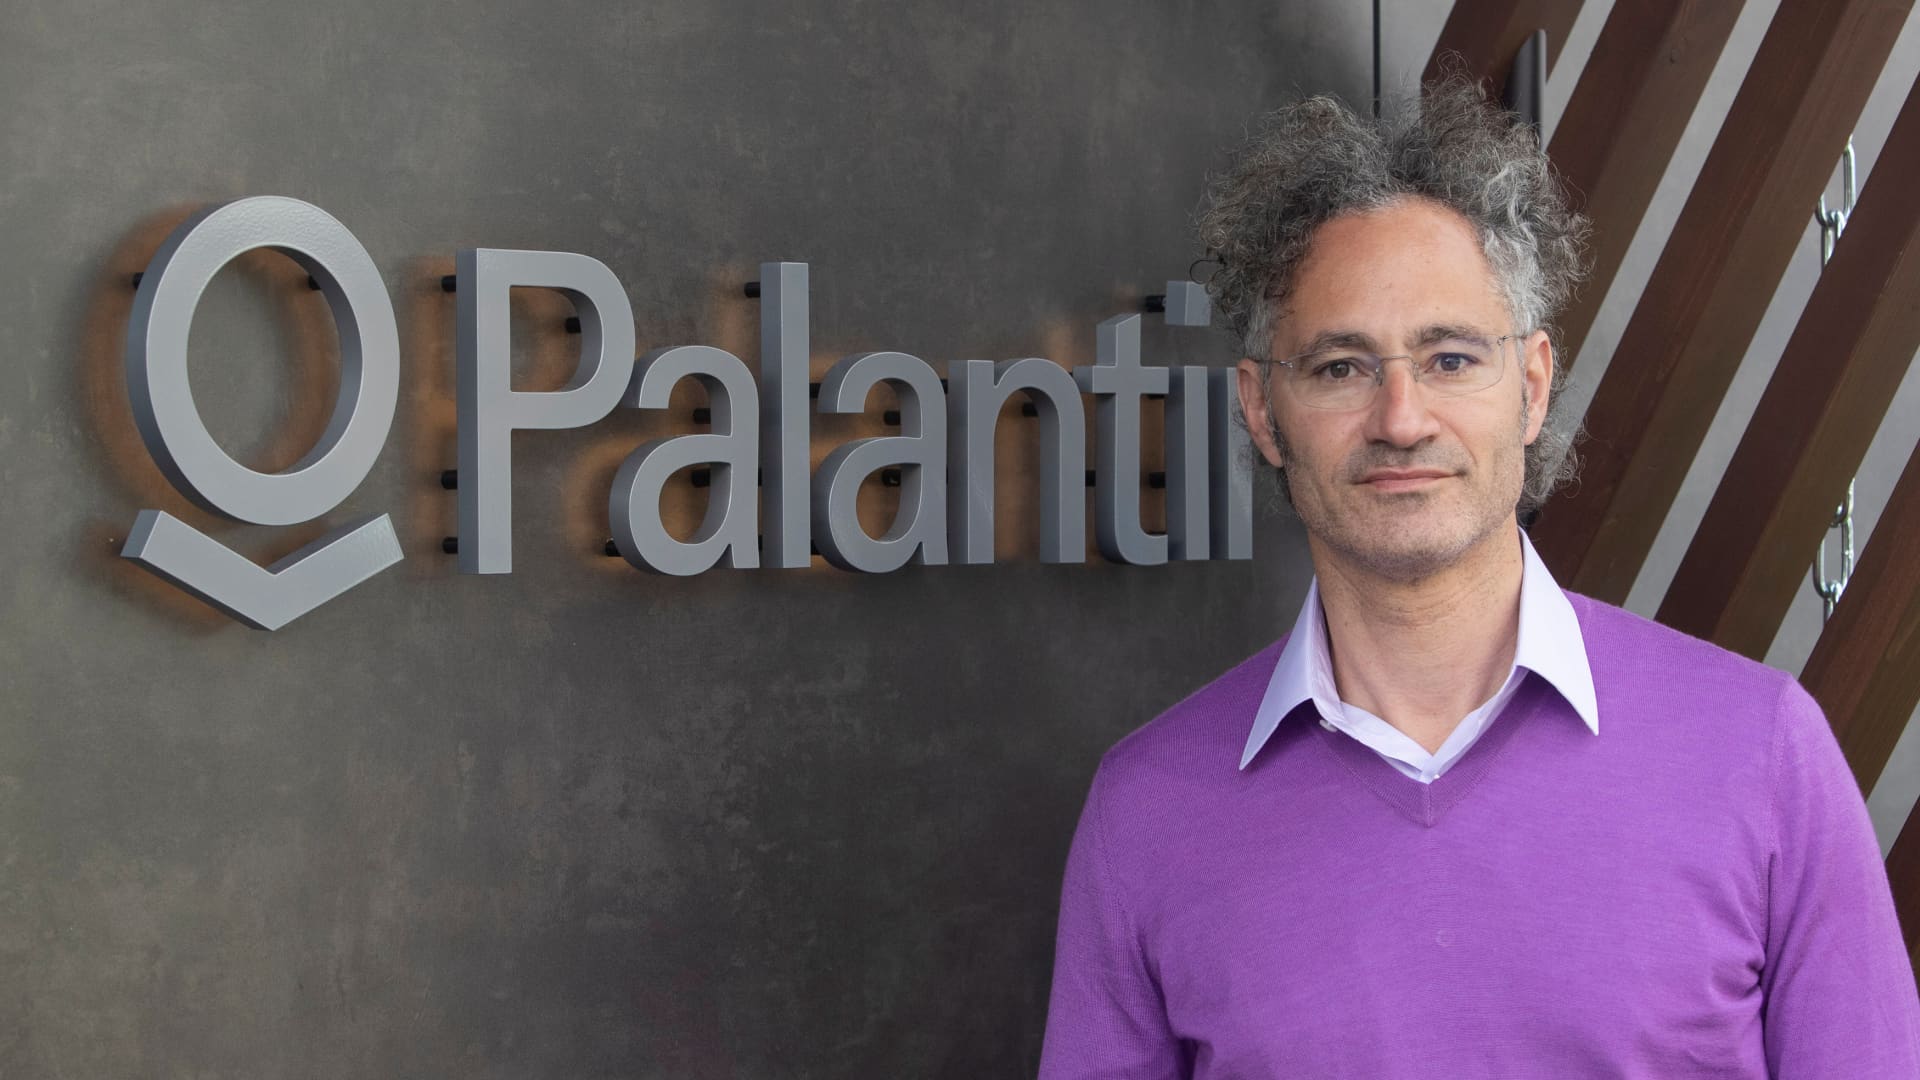 Palantir CEO says his outspoken pro-Israel views have caused employees to leave company